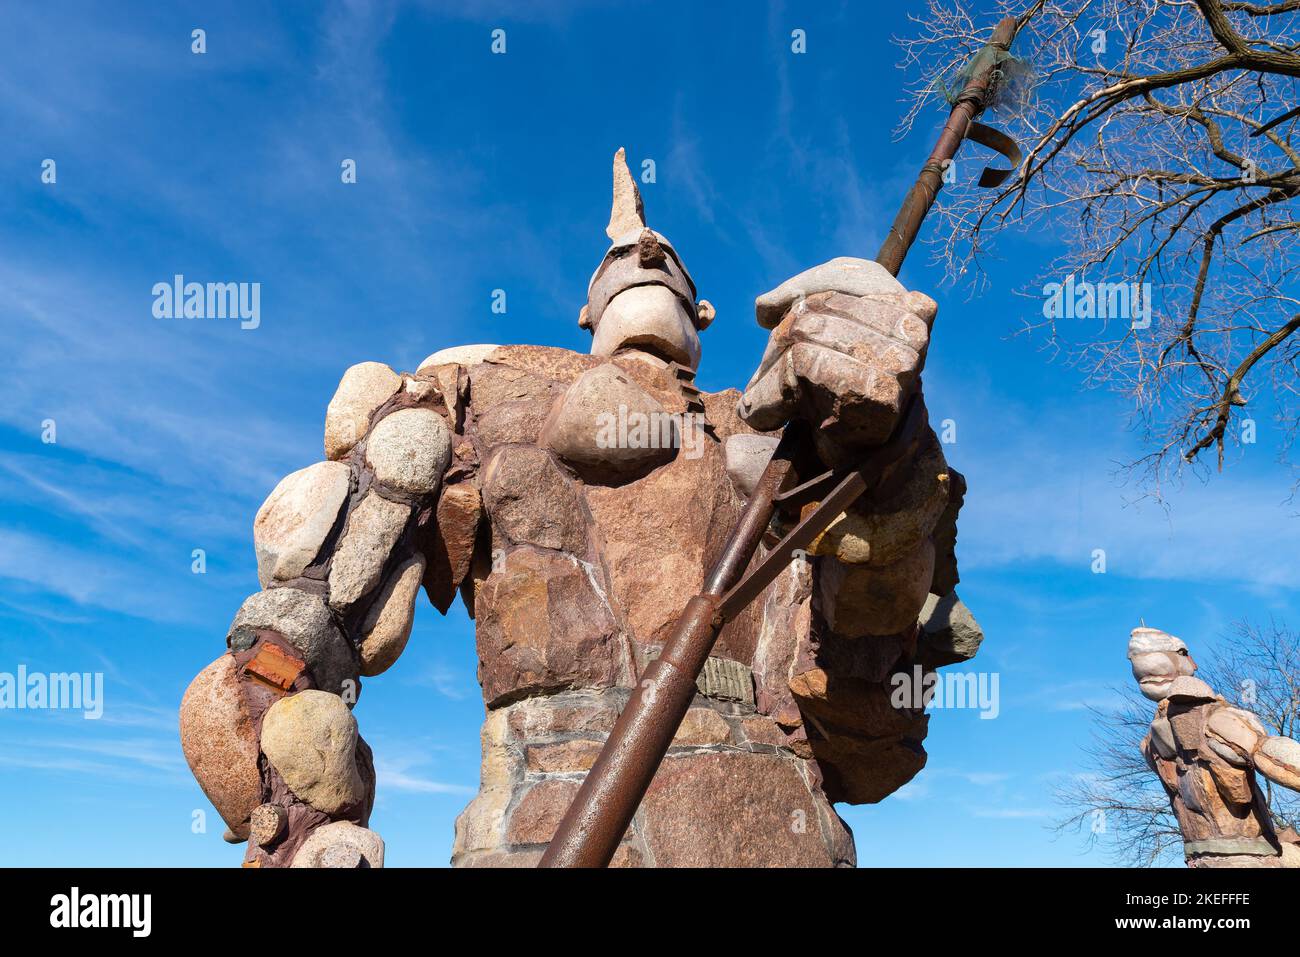 Rockford, Illinois - United States - November 7th, 2022: The Rock Guardians of Rockford sculptures by artist Terese Agnew on the Rock River, Rockford. Stock Photo